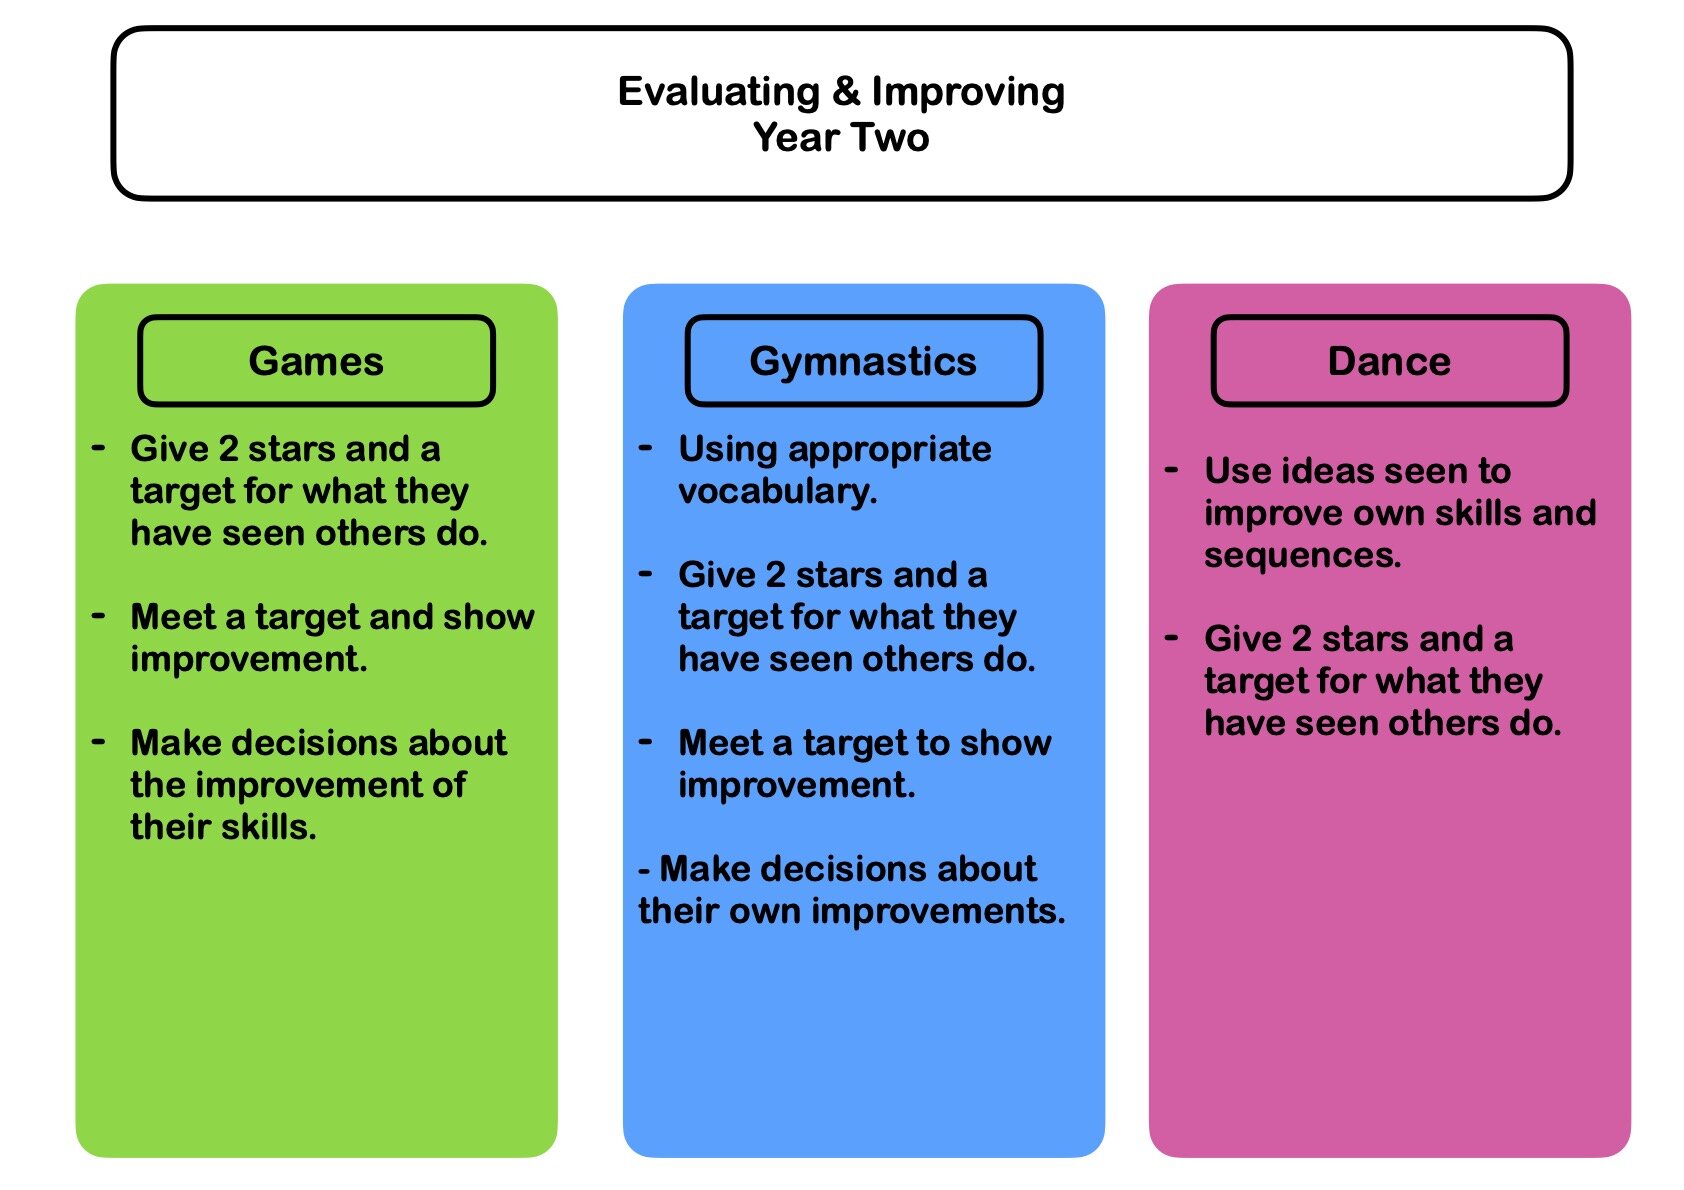 Physical Education Evaluating and Improving